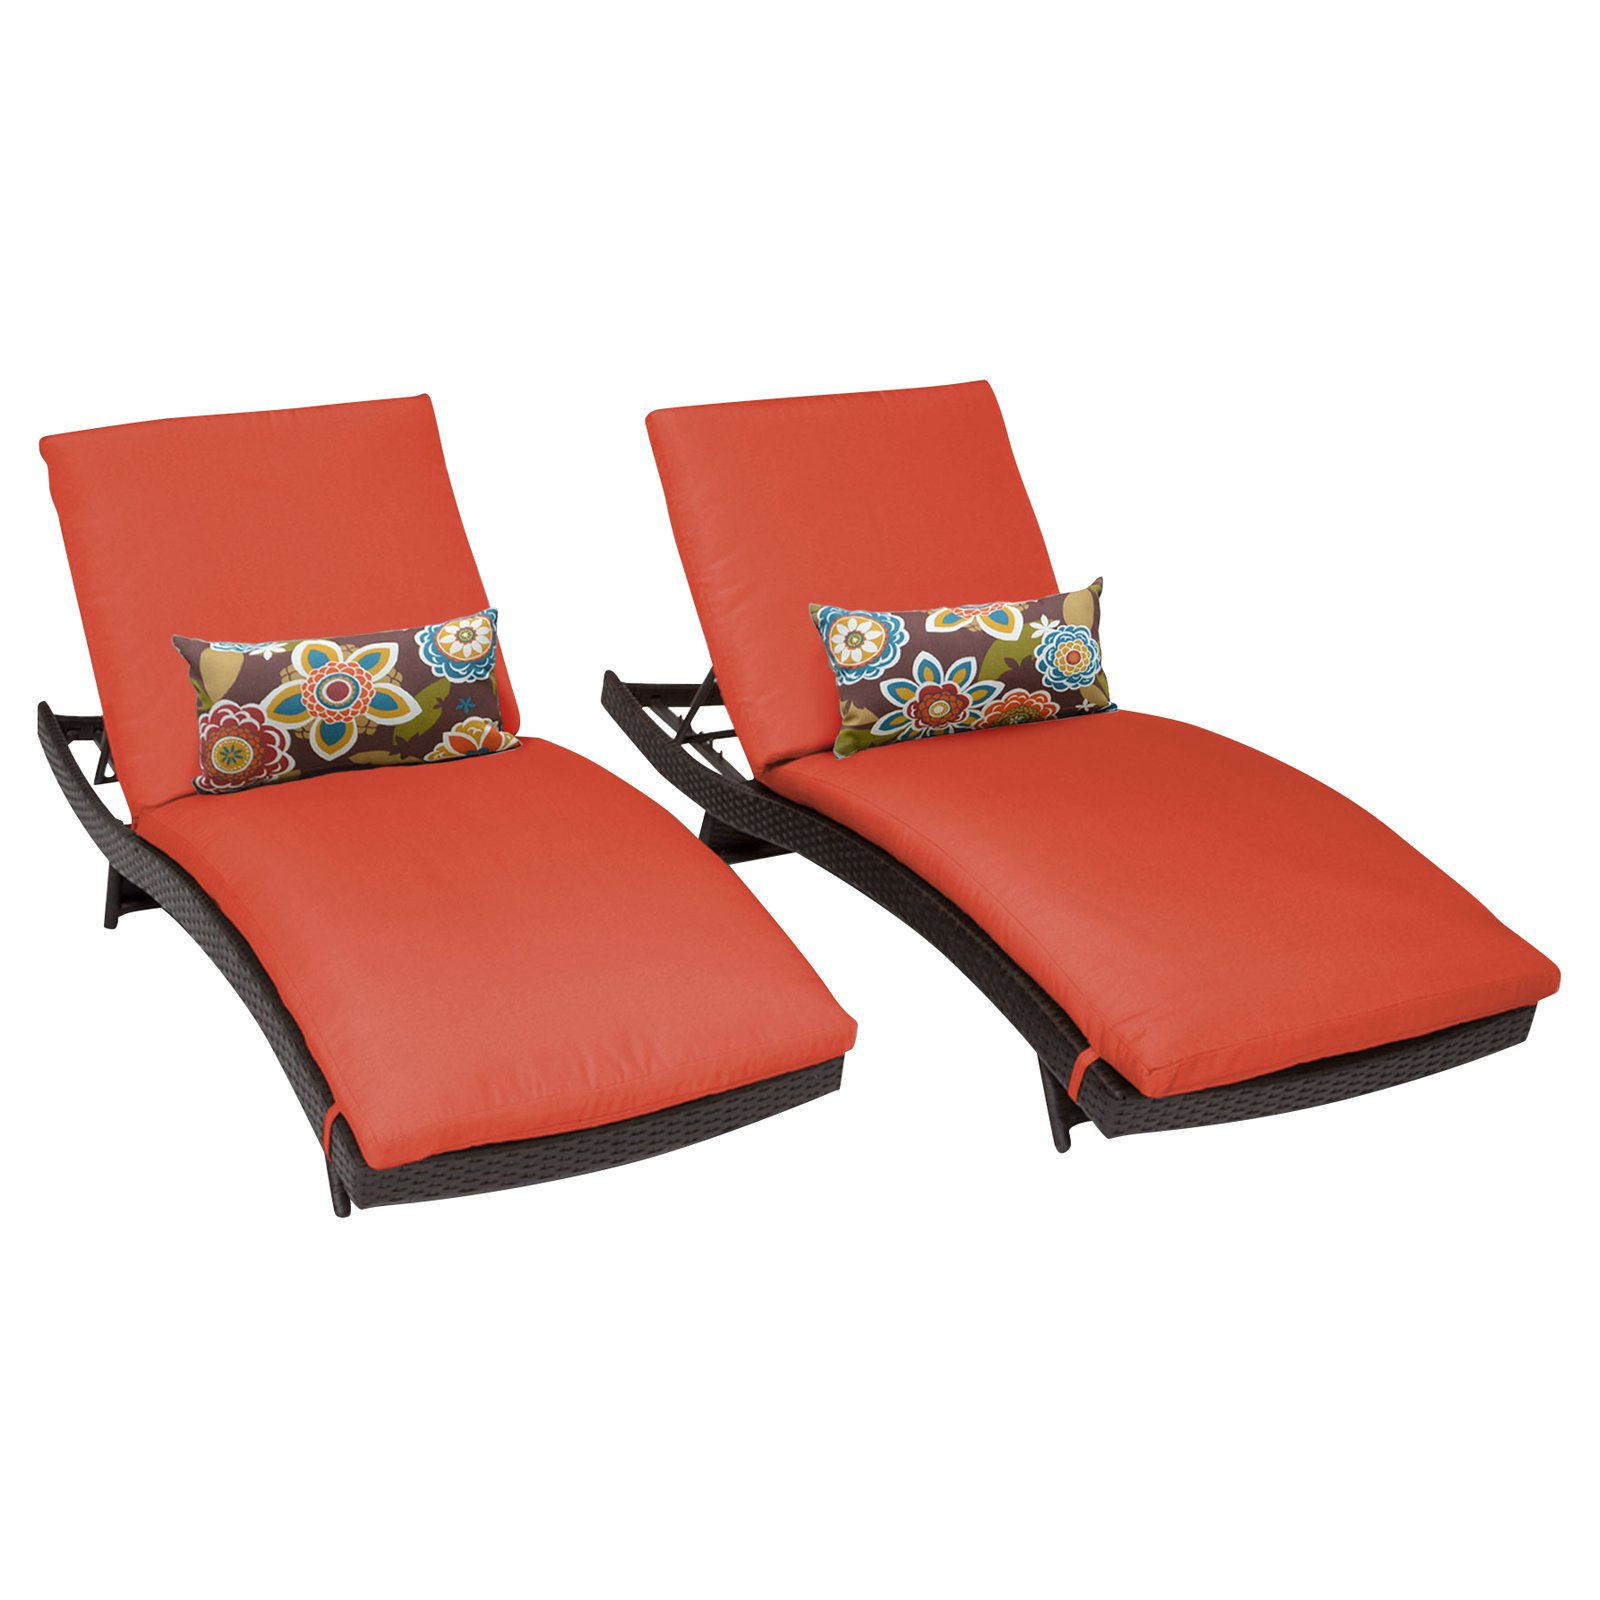 Barbados Curved Chaise Outdoor Wicker Patio Furniture in Tangerine (Set of 2) - image 1 of 4